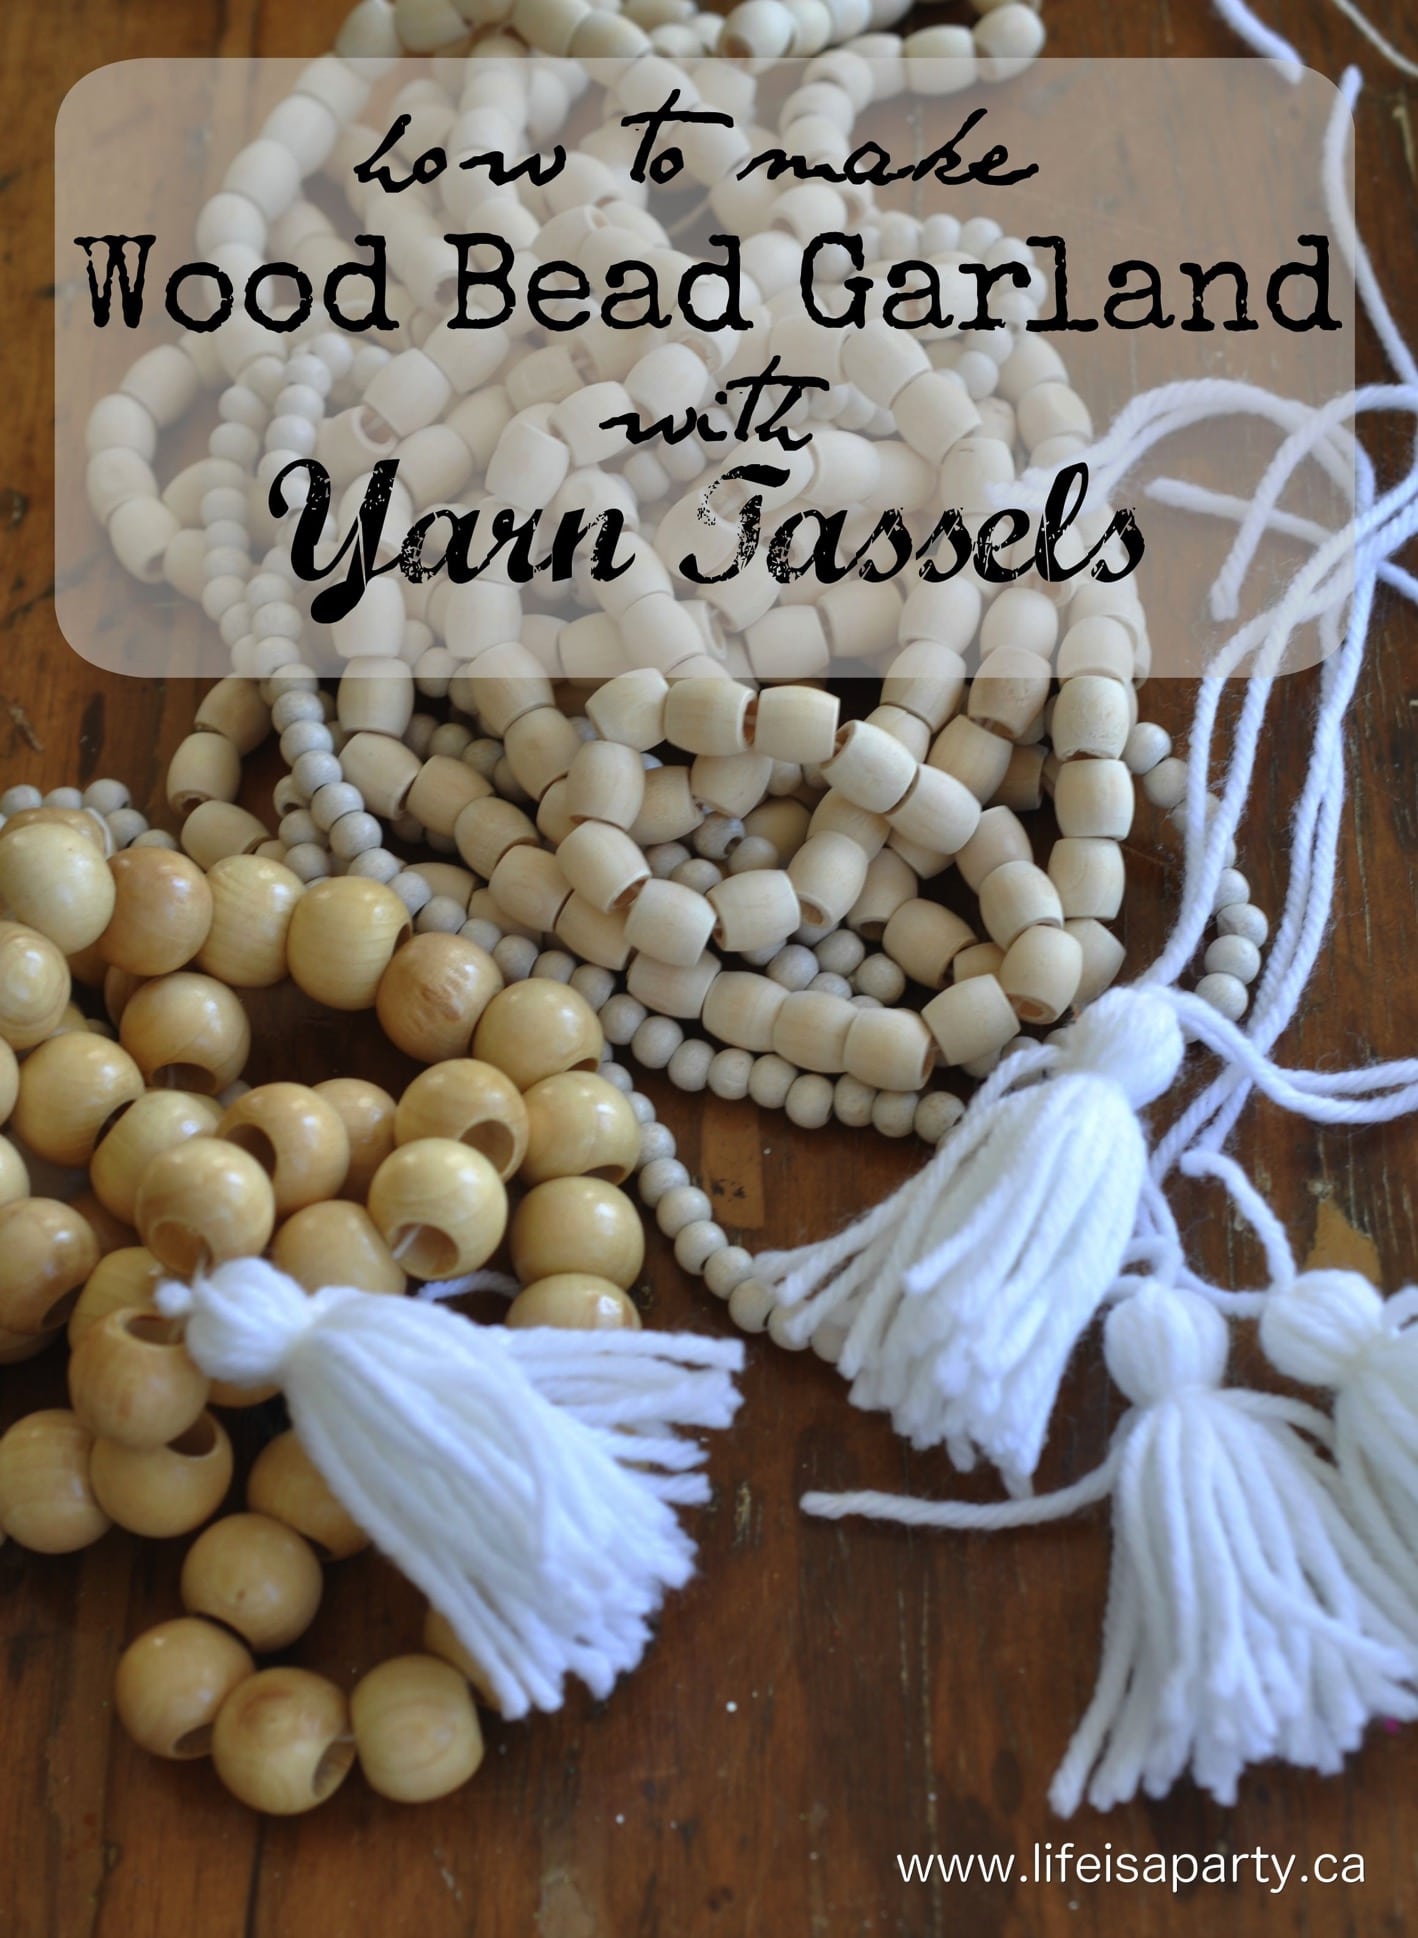 How to make Wood Bead Garland with Yarn Tassels: easy DIY for tassels and garland. Great way to add texture to home decor.